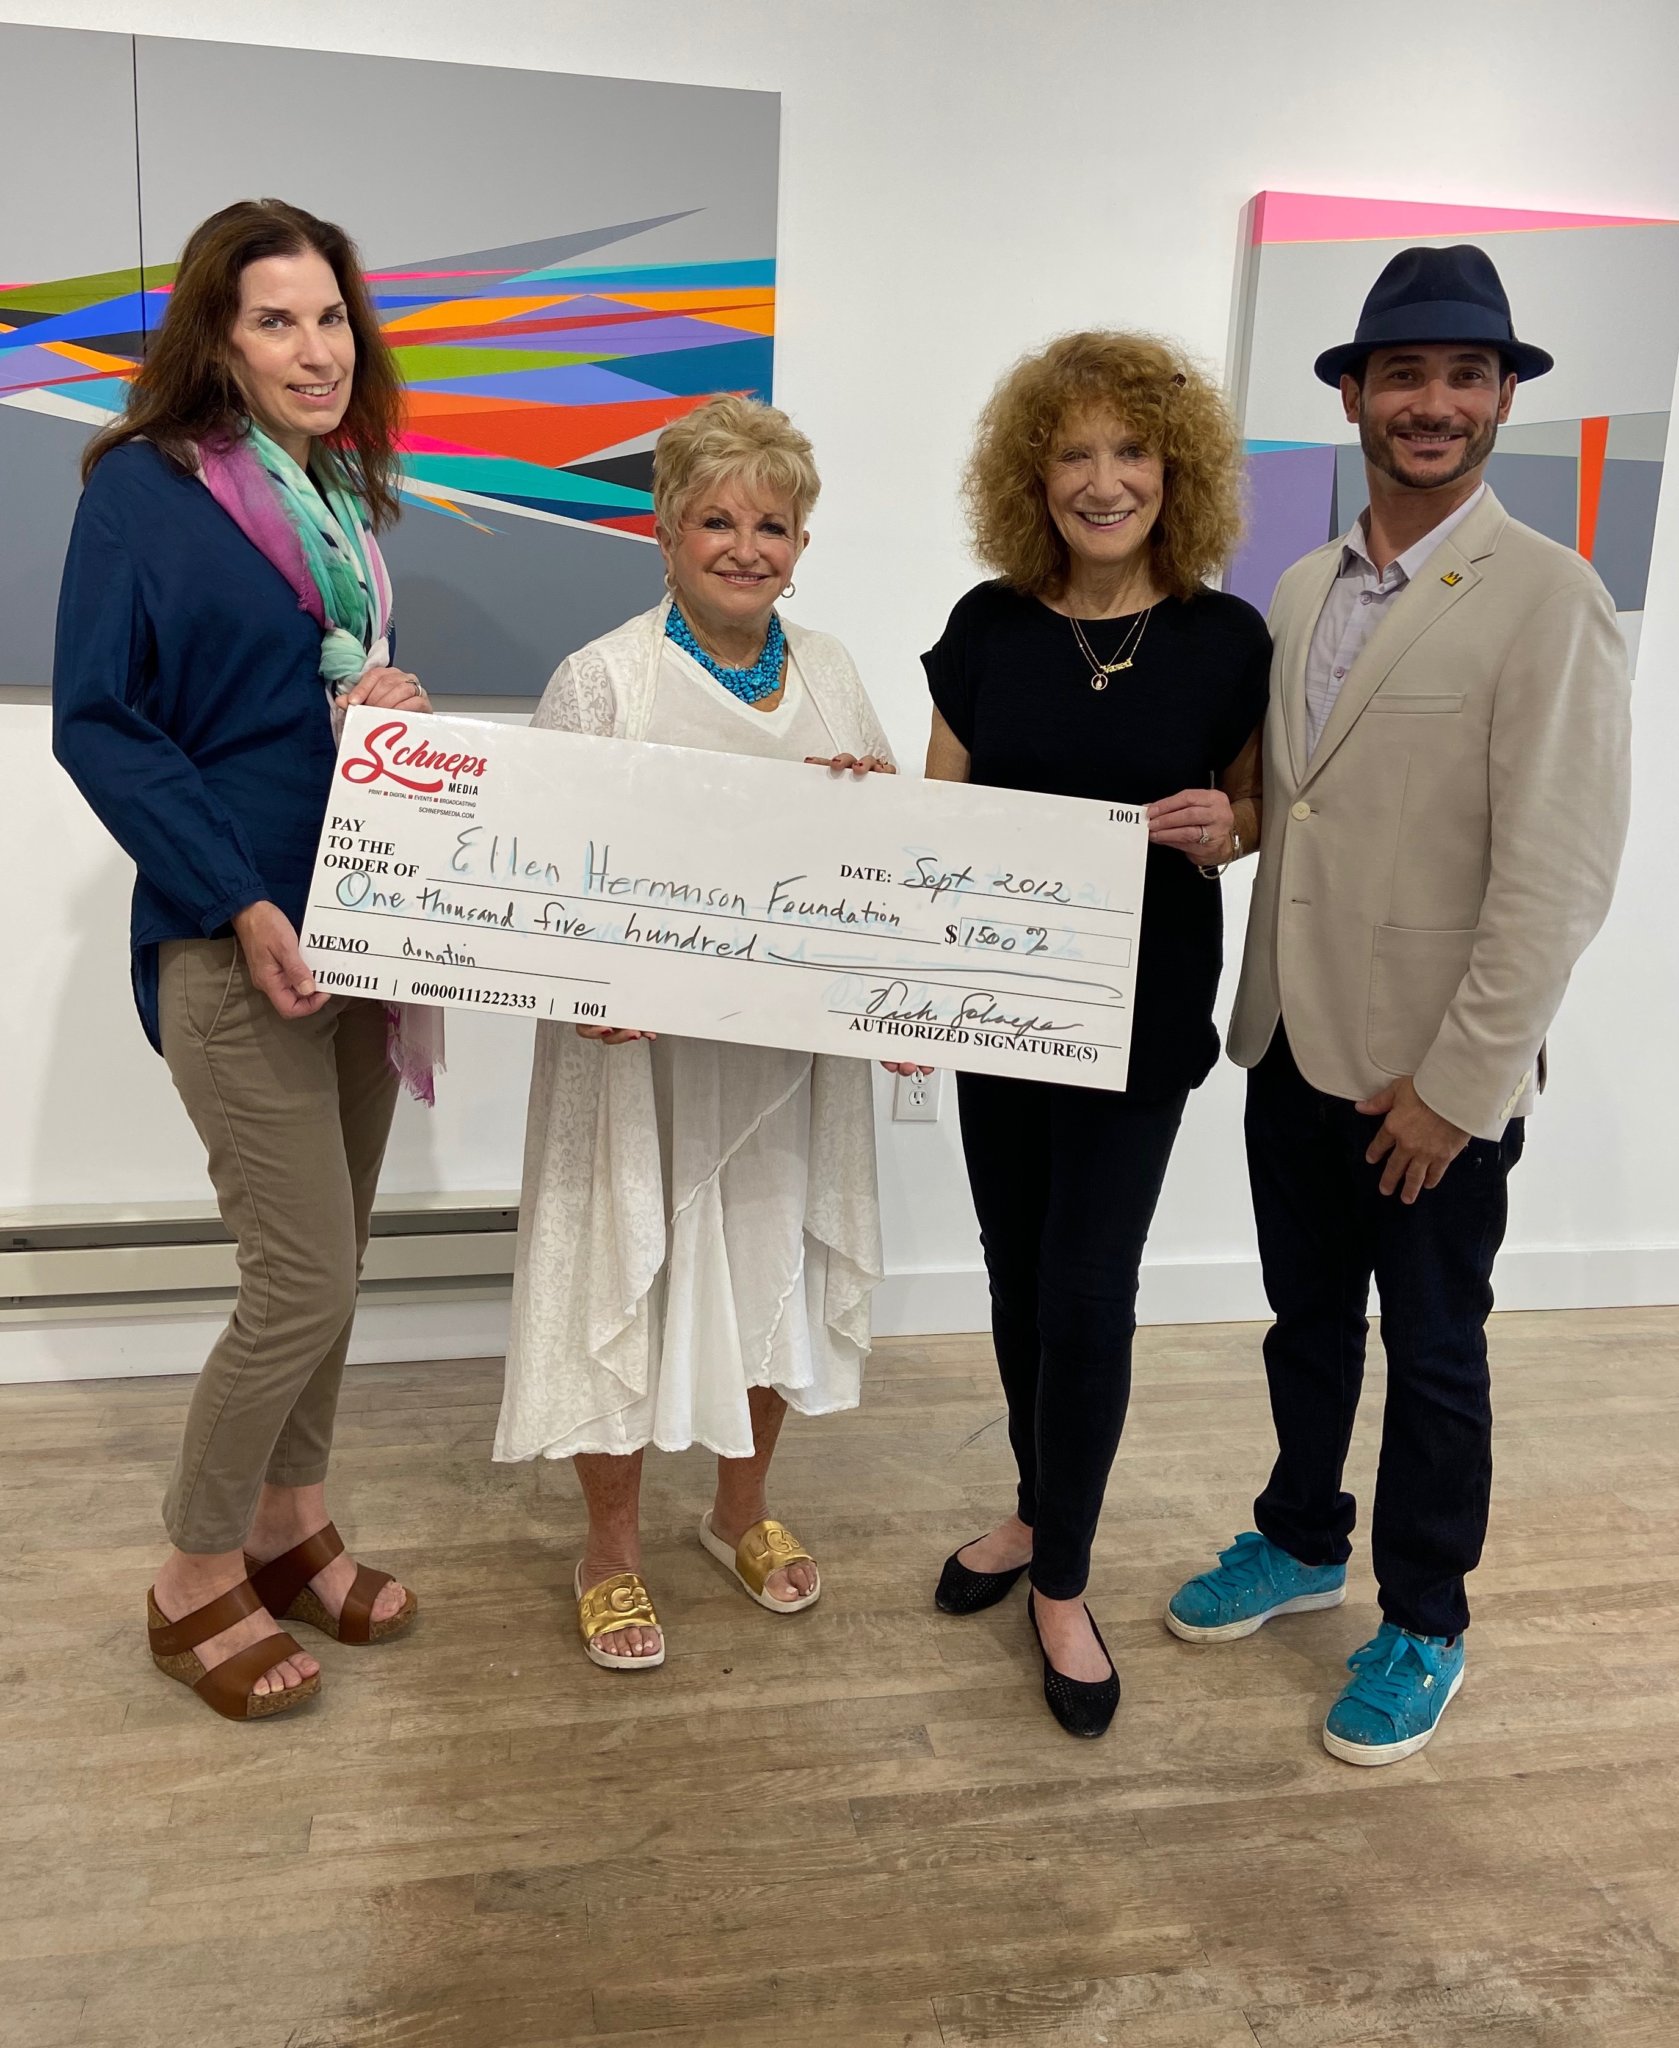 Dan’s Papers events raised $1,500 for the Ellen Hermanson Foundation. (From l. to r.) Exec. Dir. Anne Tschida Gomberg, Founder Julie Ratner and gallery owner Yuval Marquez Fleites.